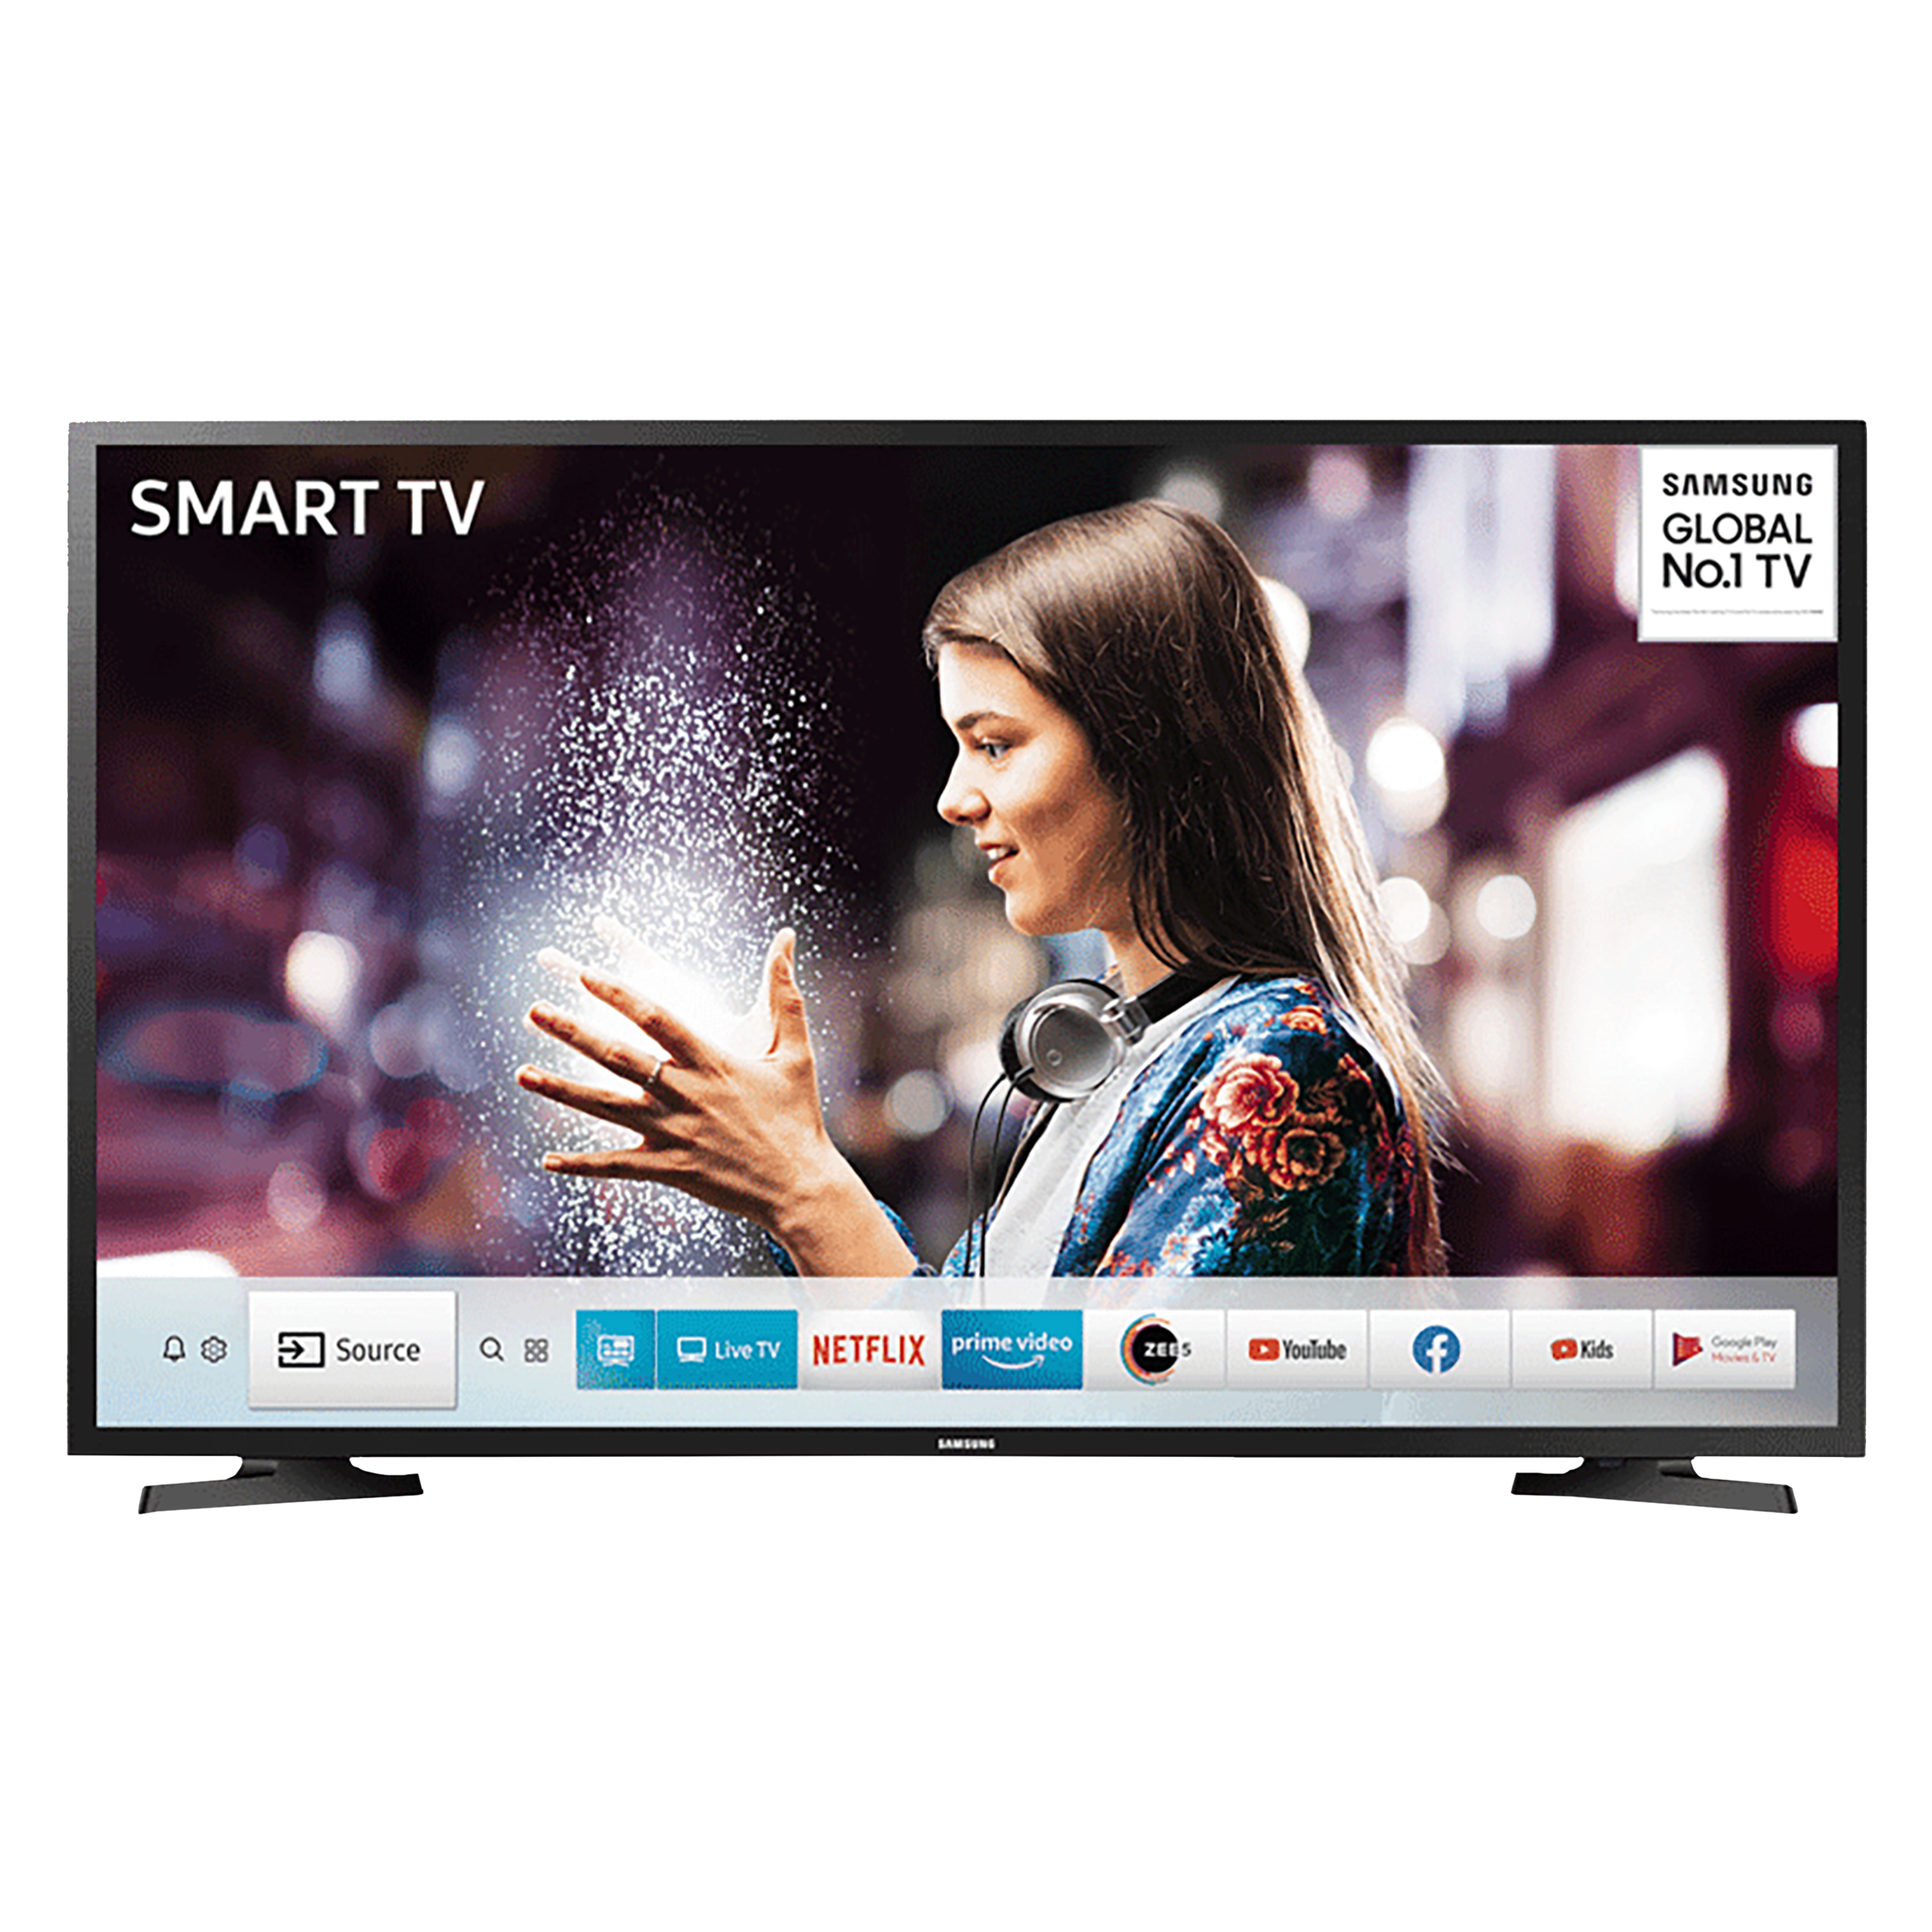 SAMSUNG Series 5 108 cm (43 inch) Full HD LED Smart Tizen TV with Alexa Compatibility_1